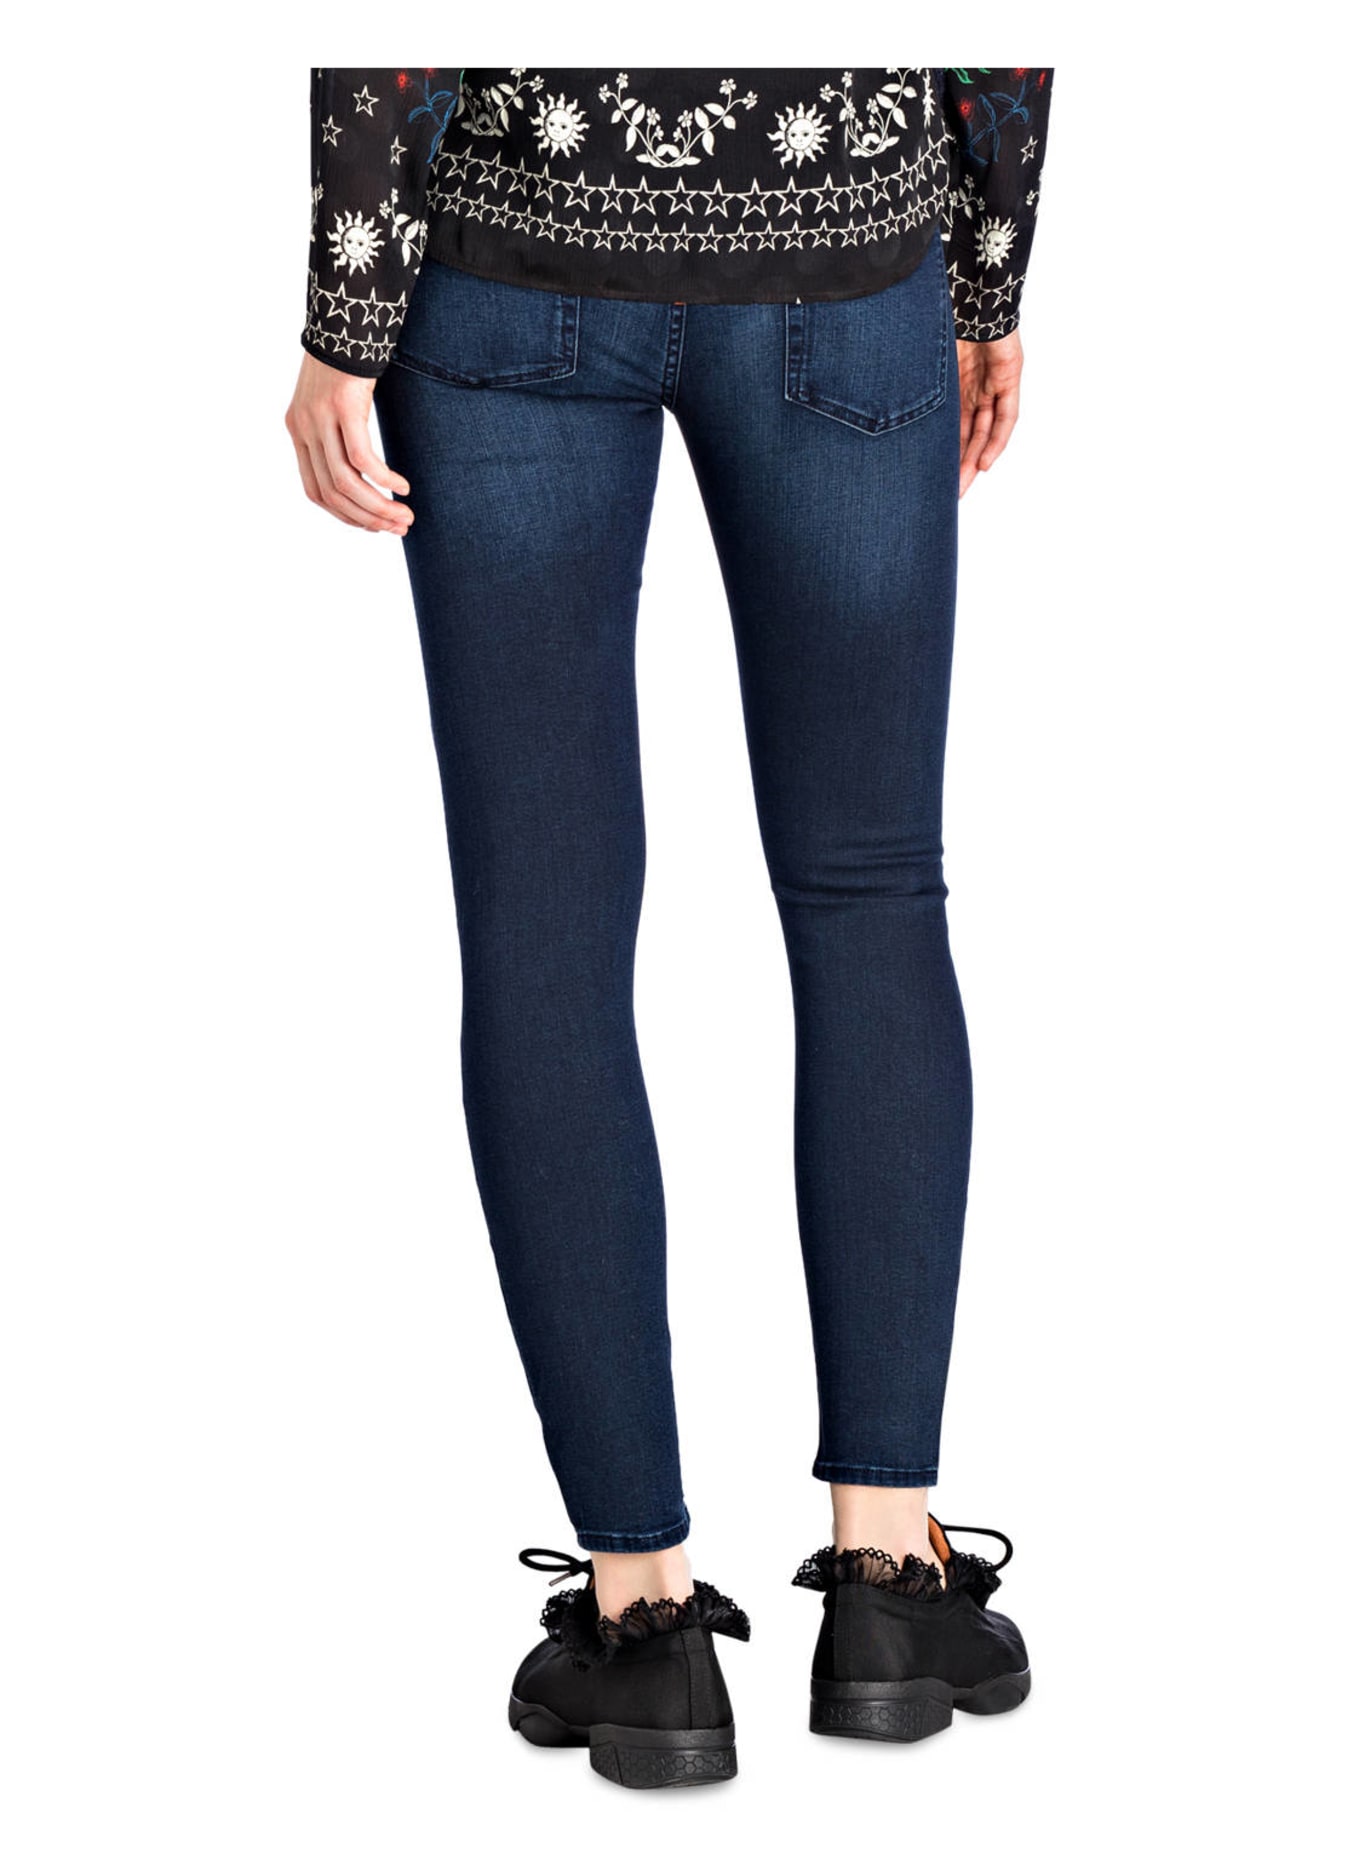 7 for all mankind Cropped-Jeans THE SKINNY CROP, Farbe: UF BAIR PARK AVENUE DARKBLUE (Bild 3)